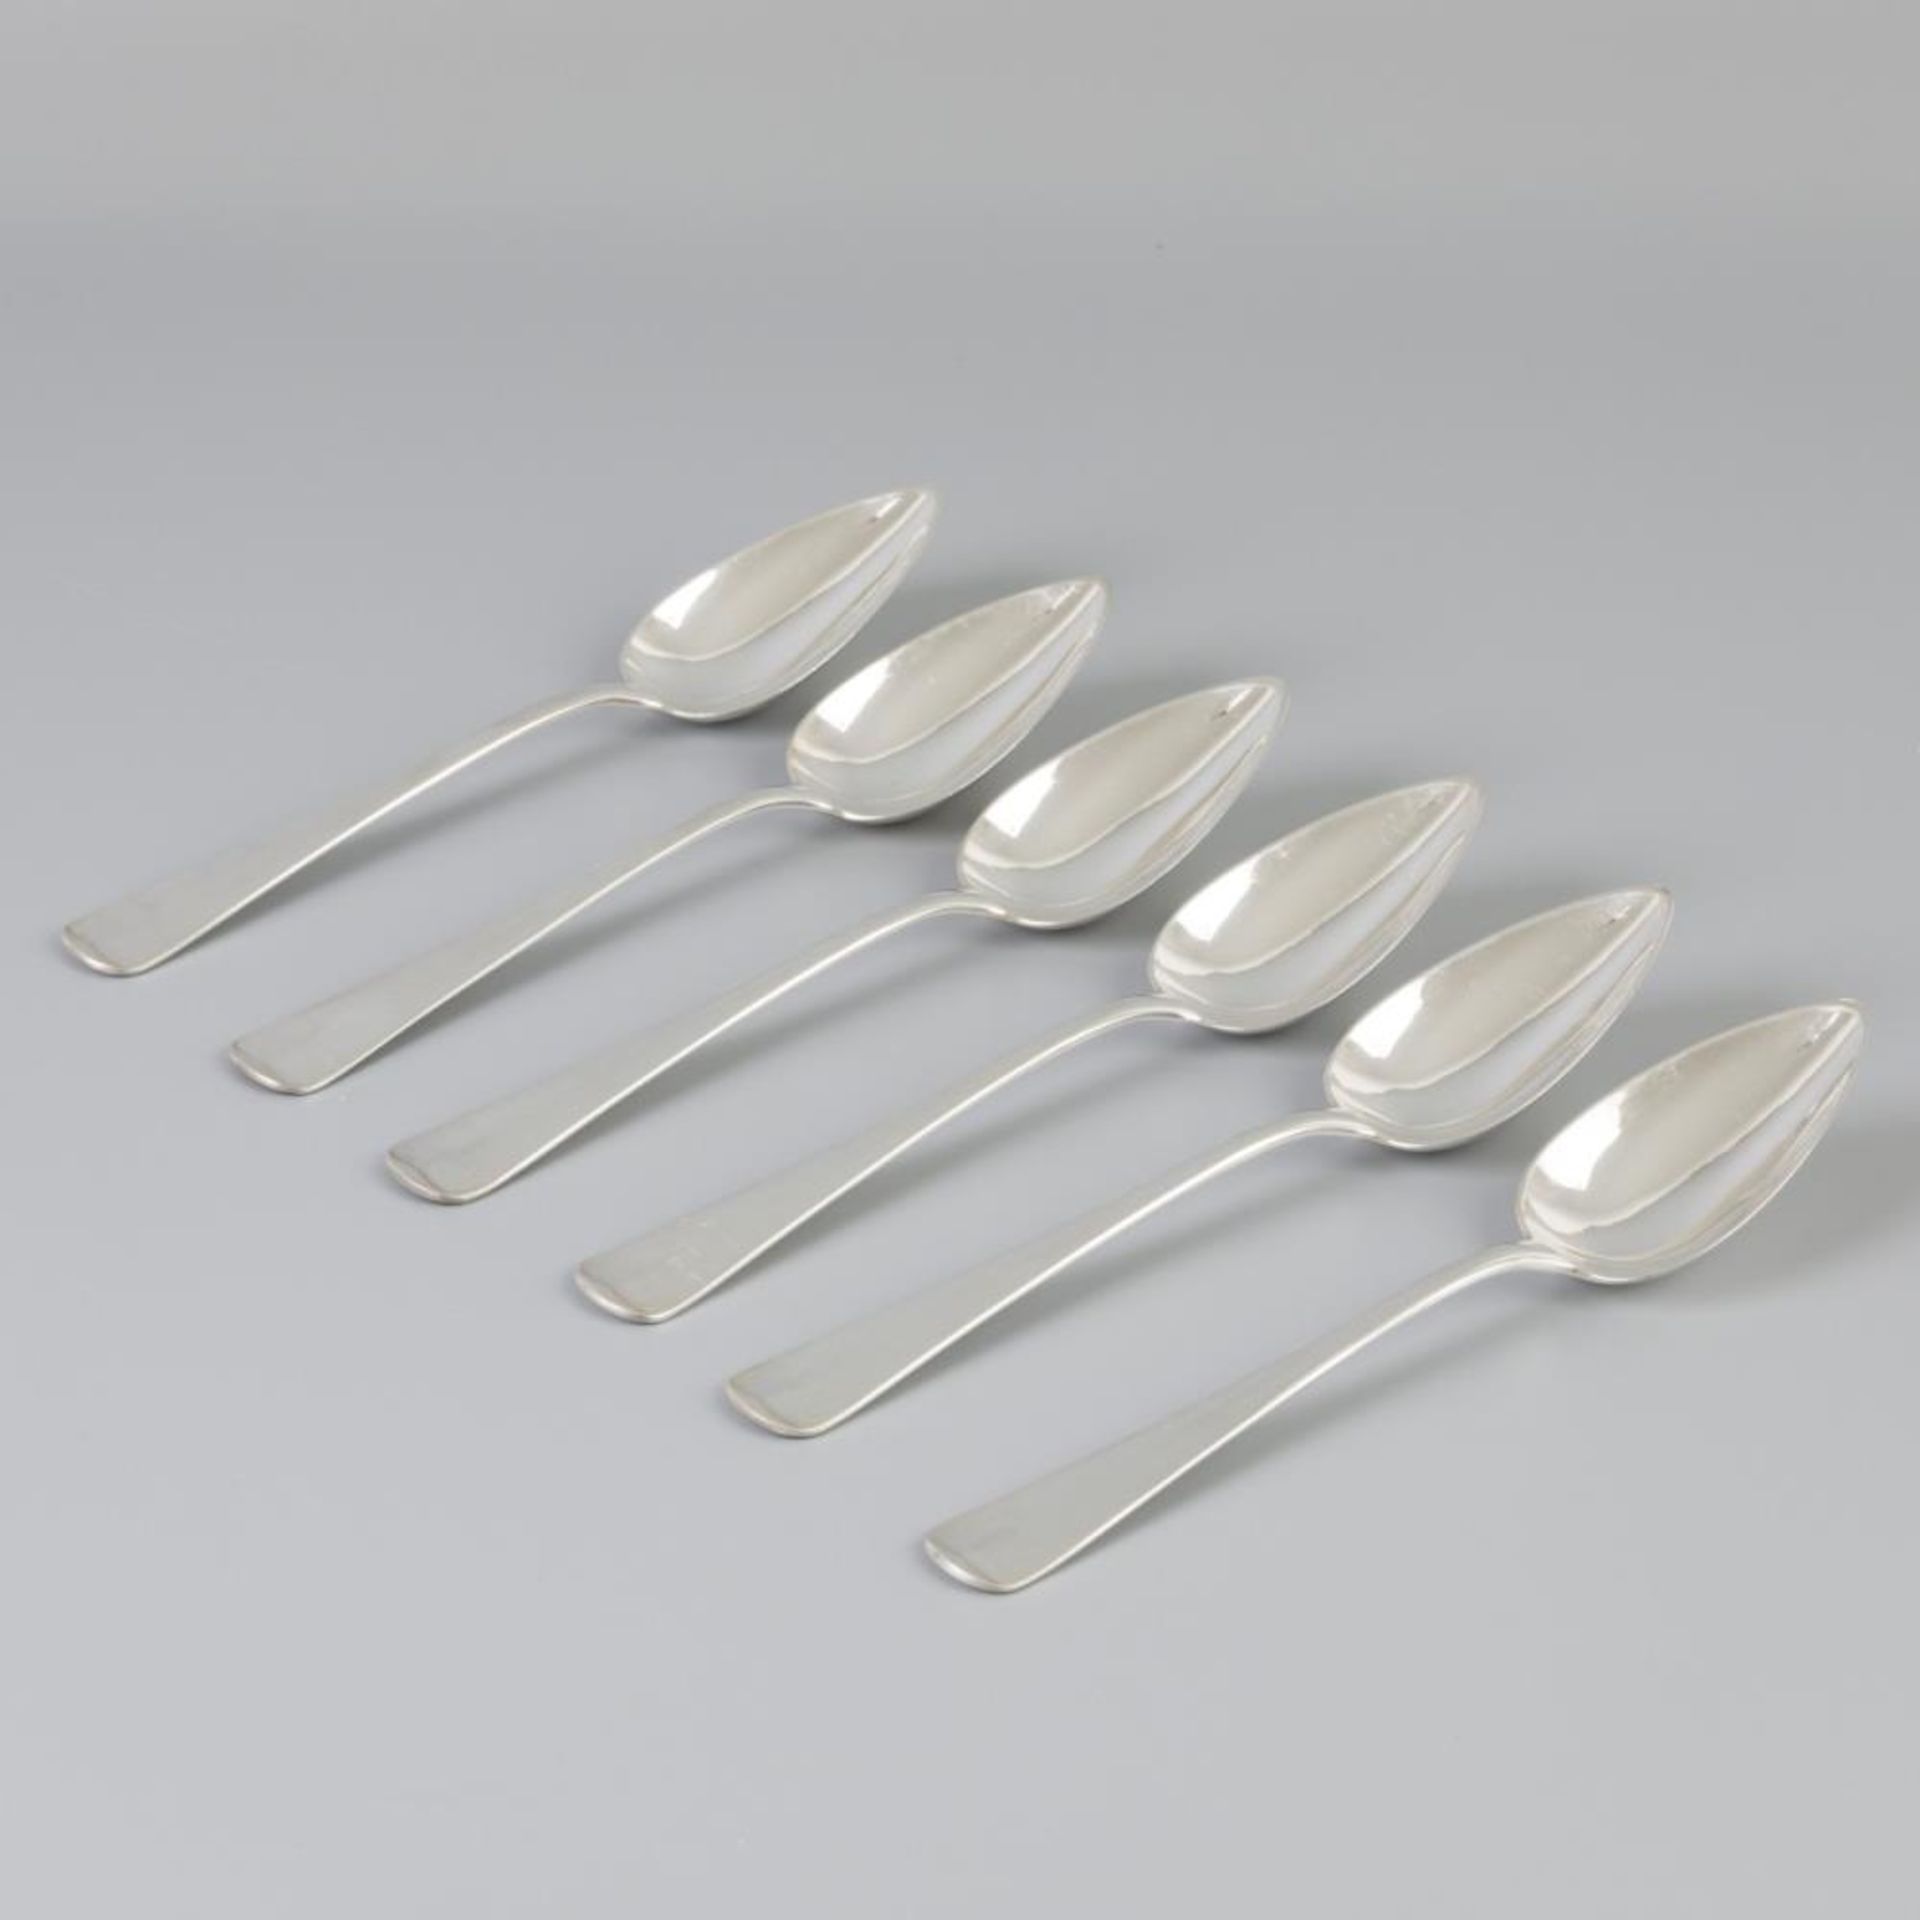 6 piece set dinner spoons "Haags Lofje" silver.